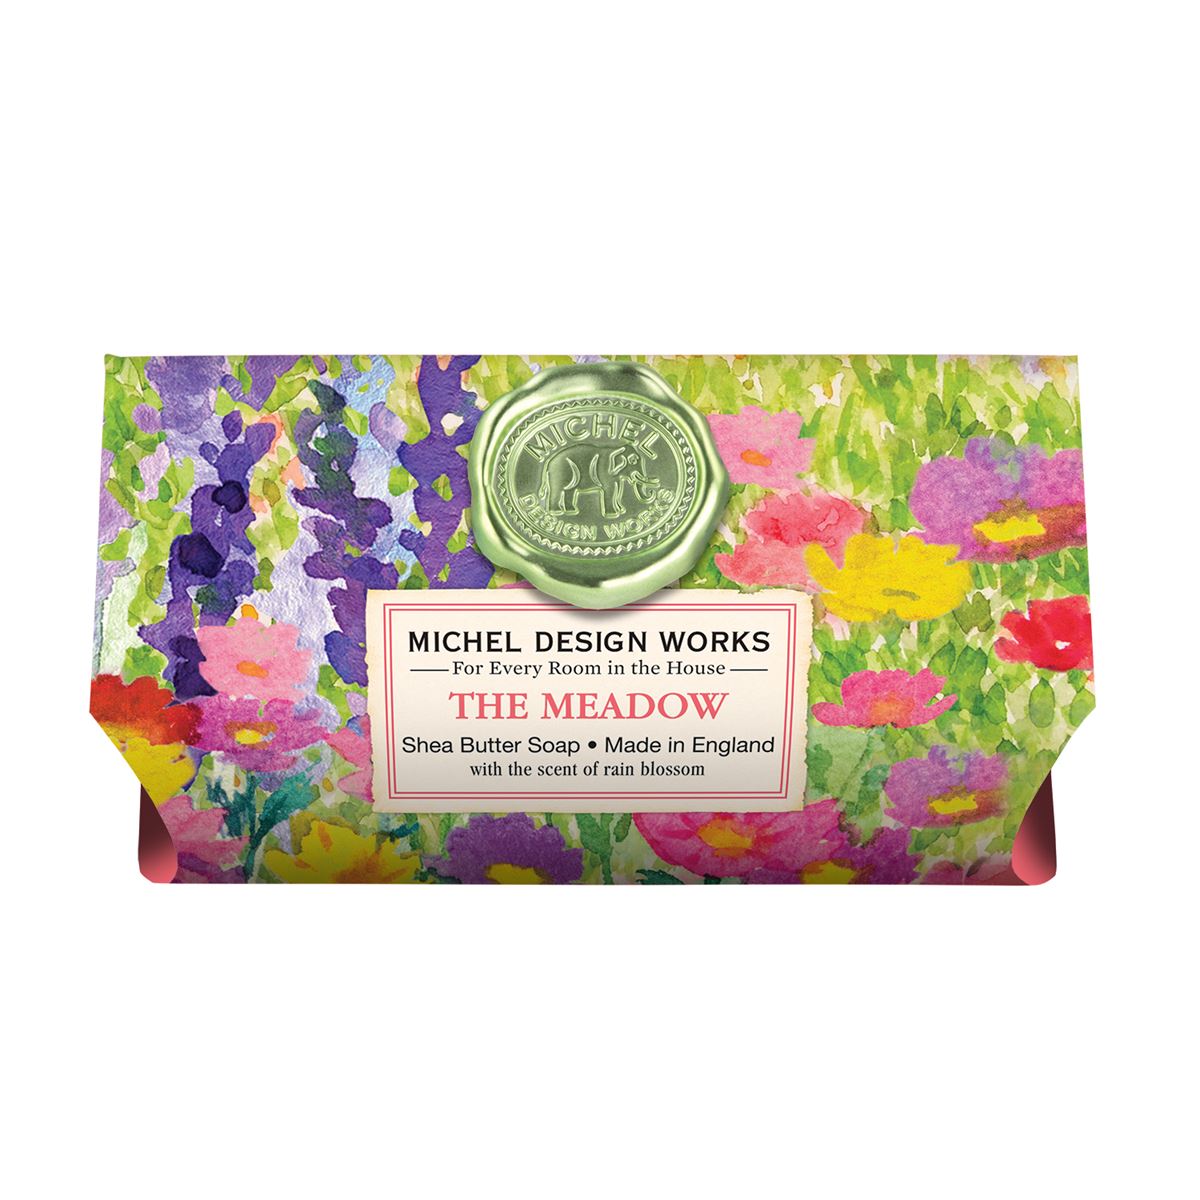 The Meadow Large Bath Soap Bar by Michel Design Works